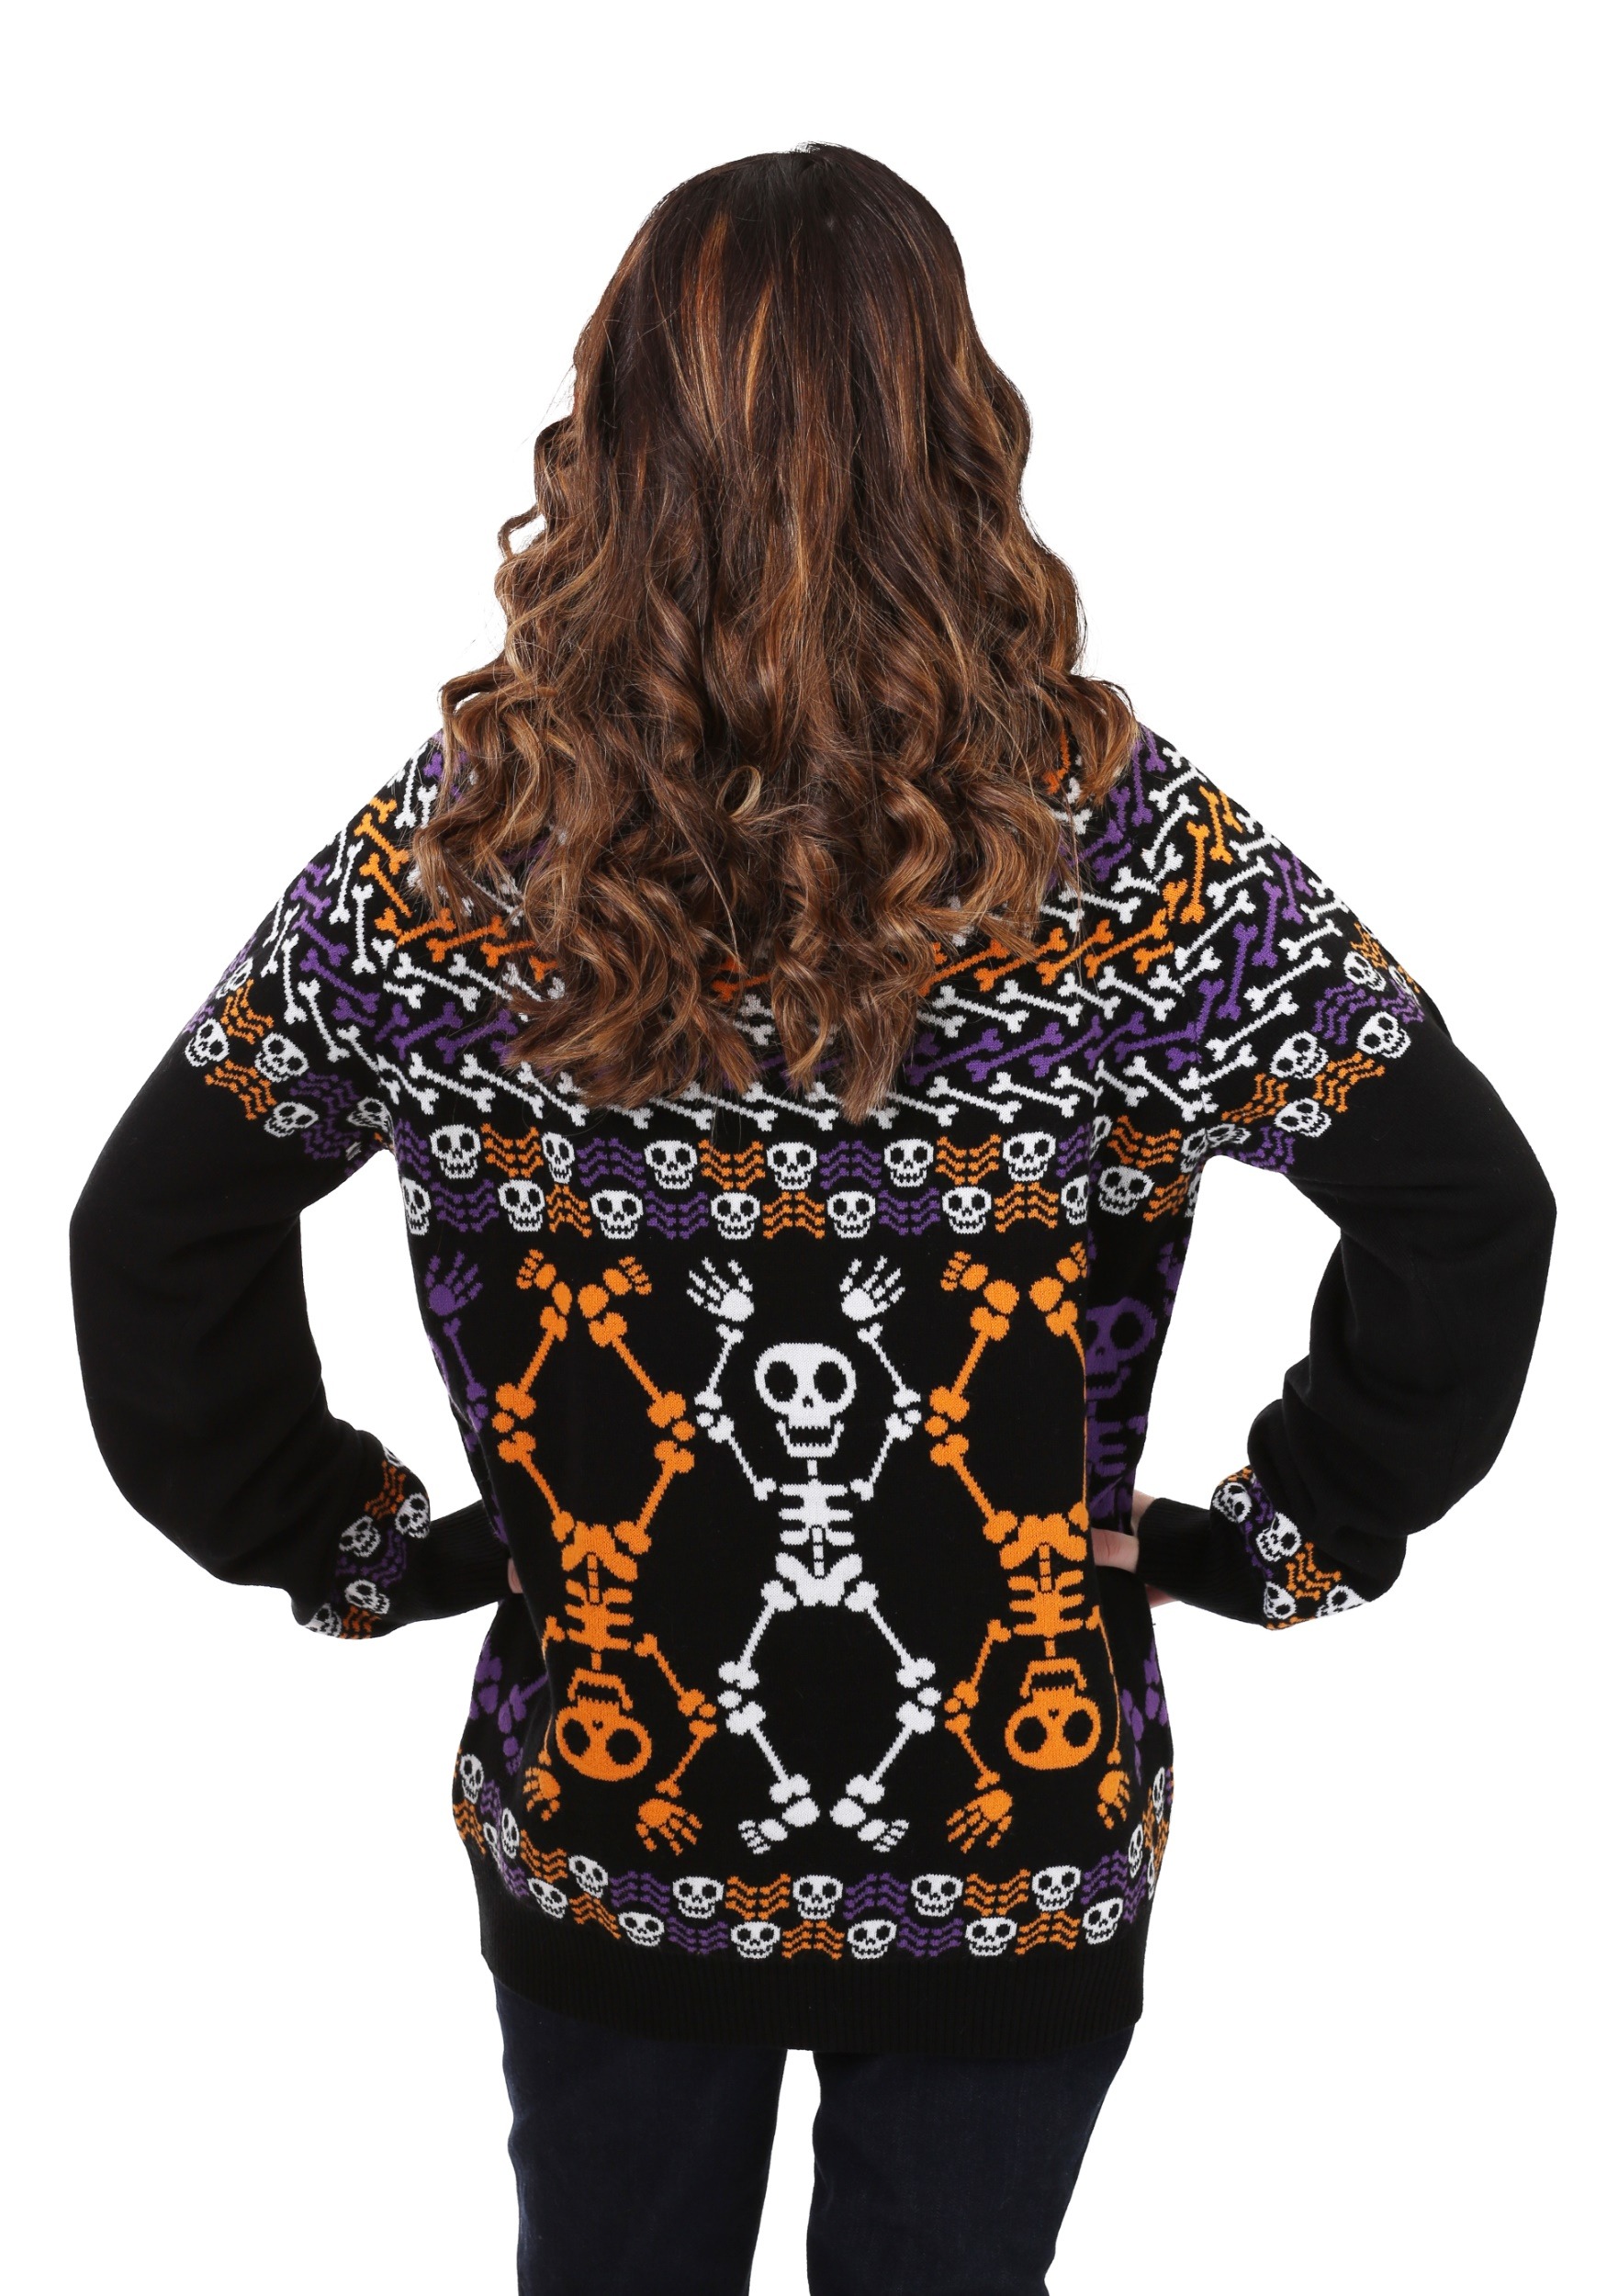 Day of the Dead Dancing Skeletons Ugly Halloween Sweater for Adults